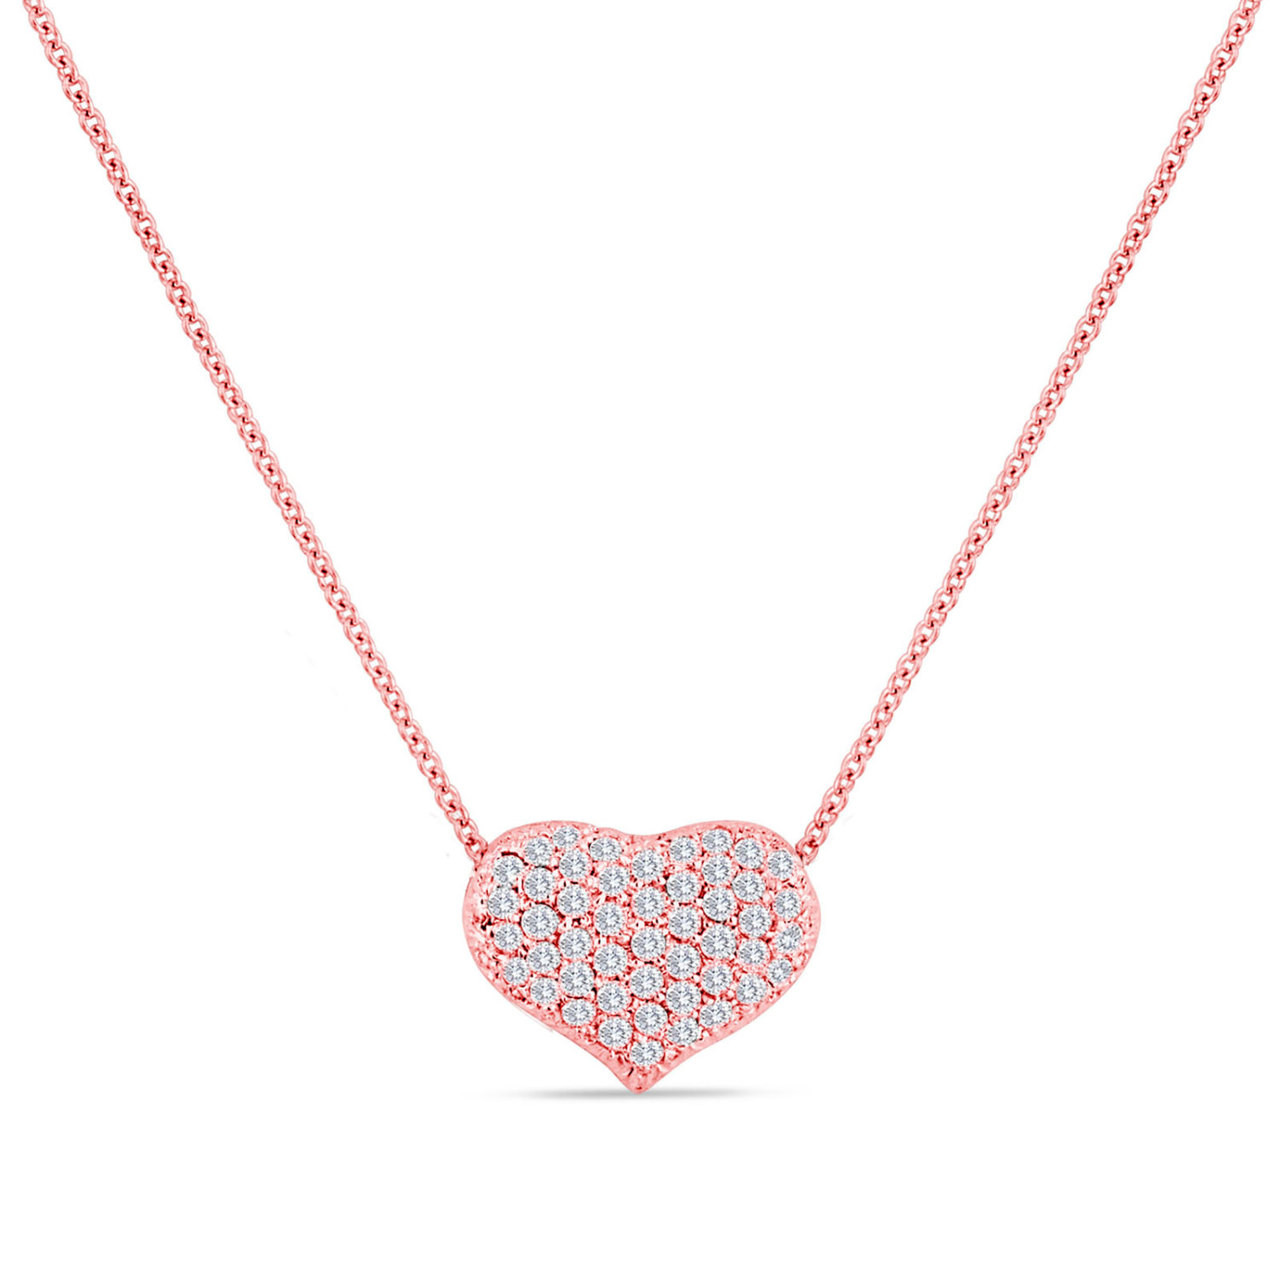 heartbeat necklace rose gold 20in